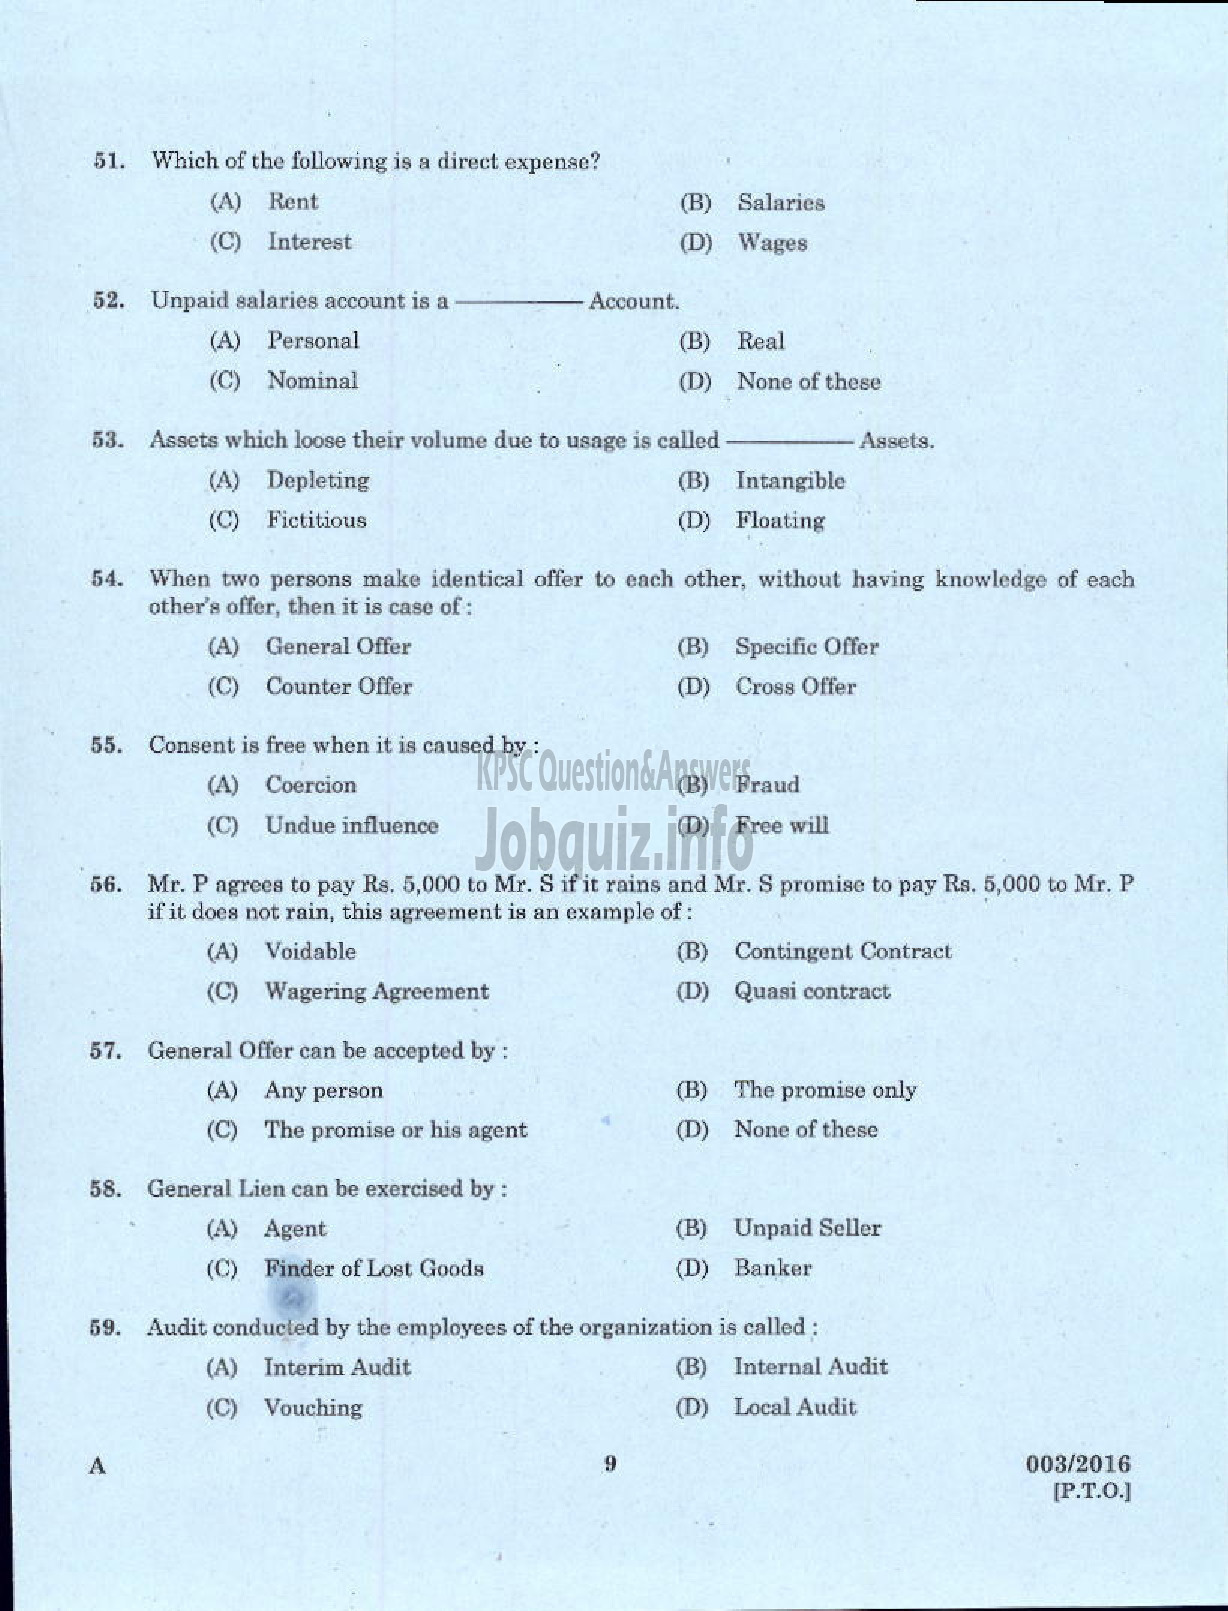 Kerala PSC Question Paper - VOCATIONAL TEACHER IN ACCOUNTANCY AND AUDTING VHSE-7